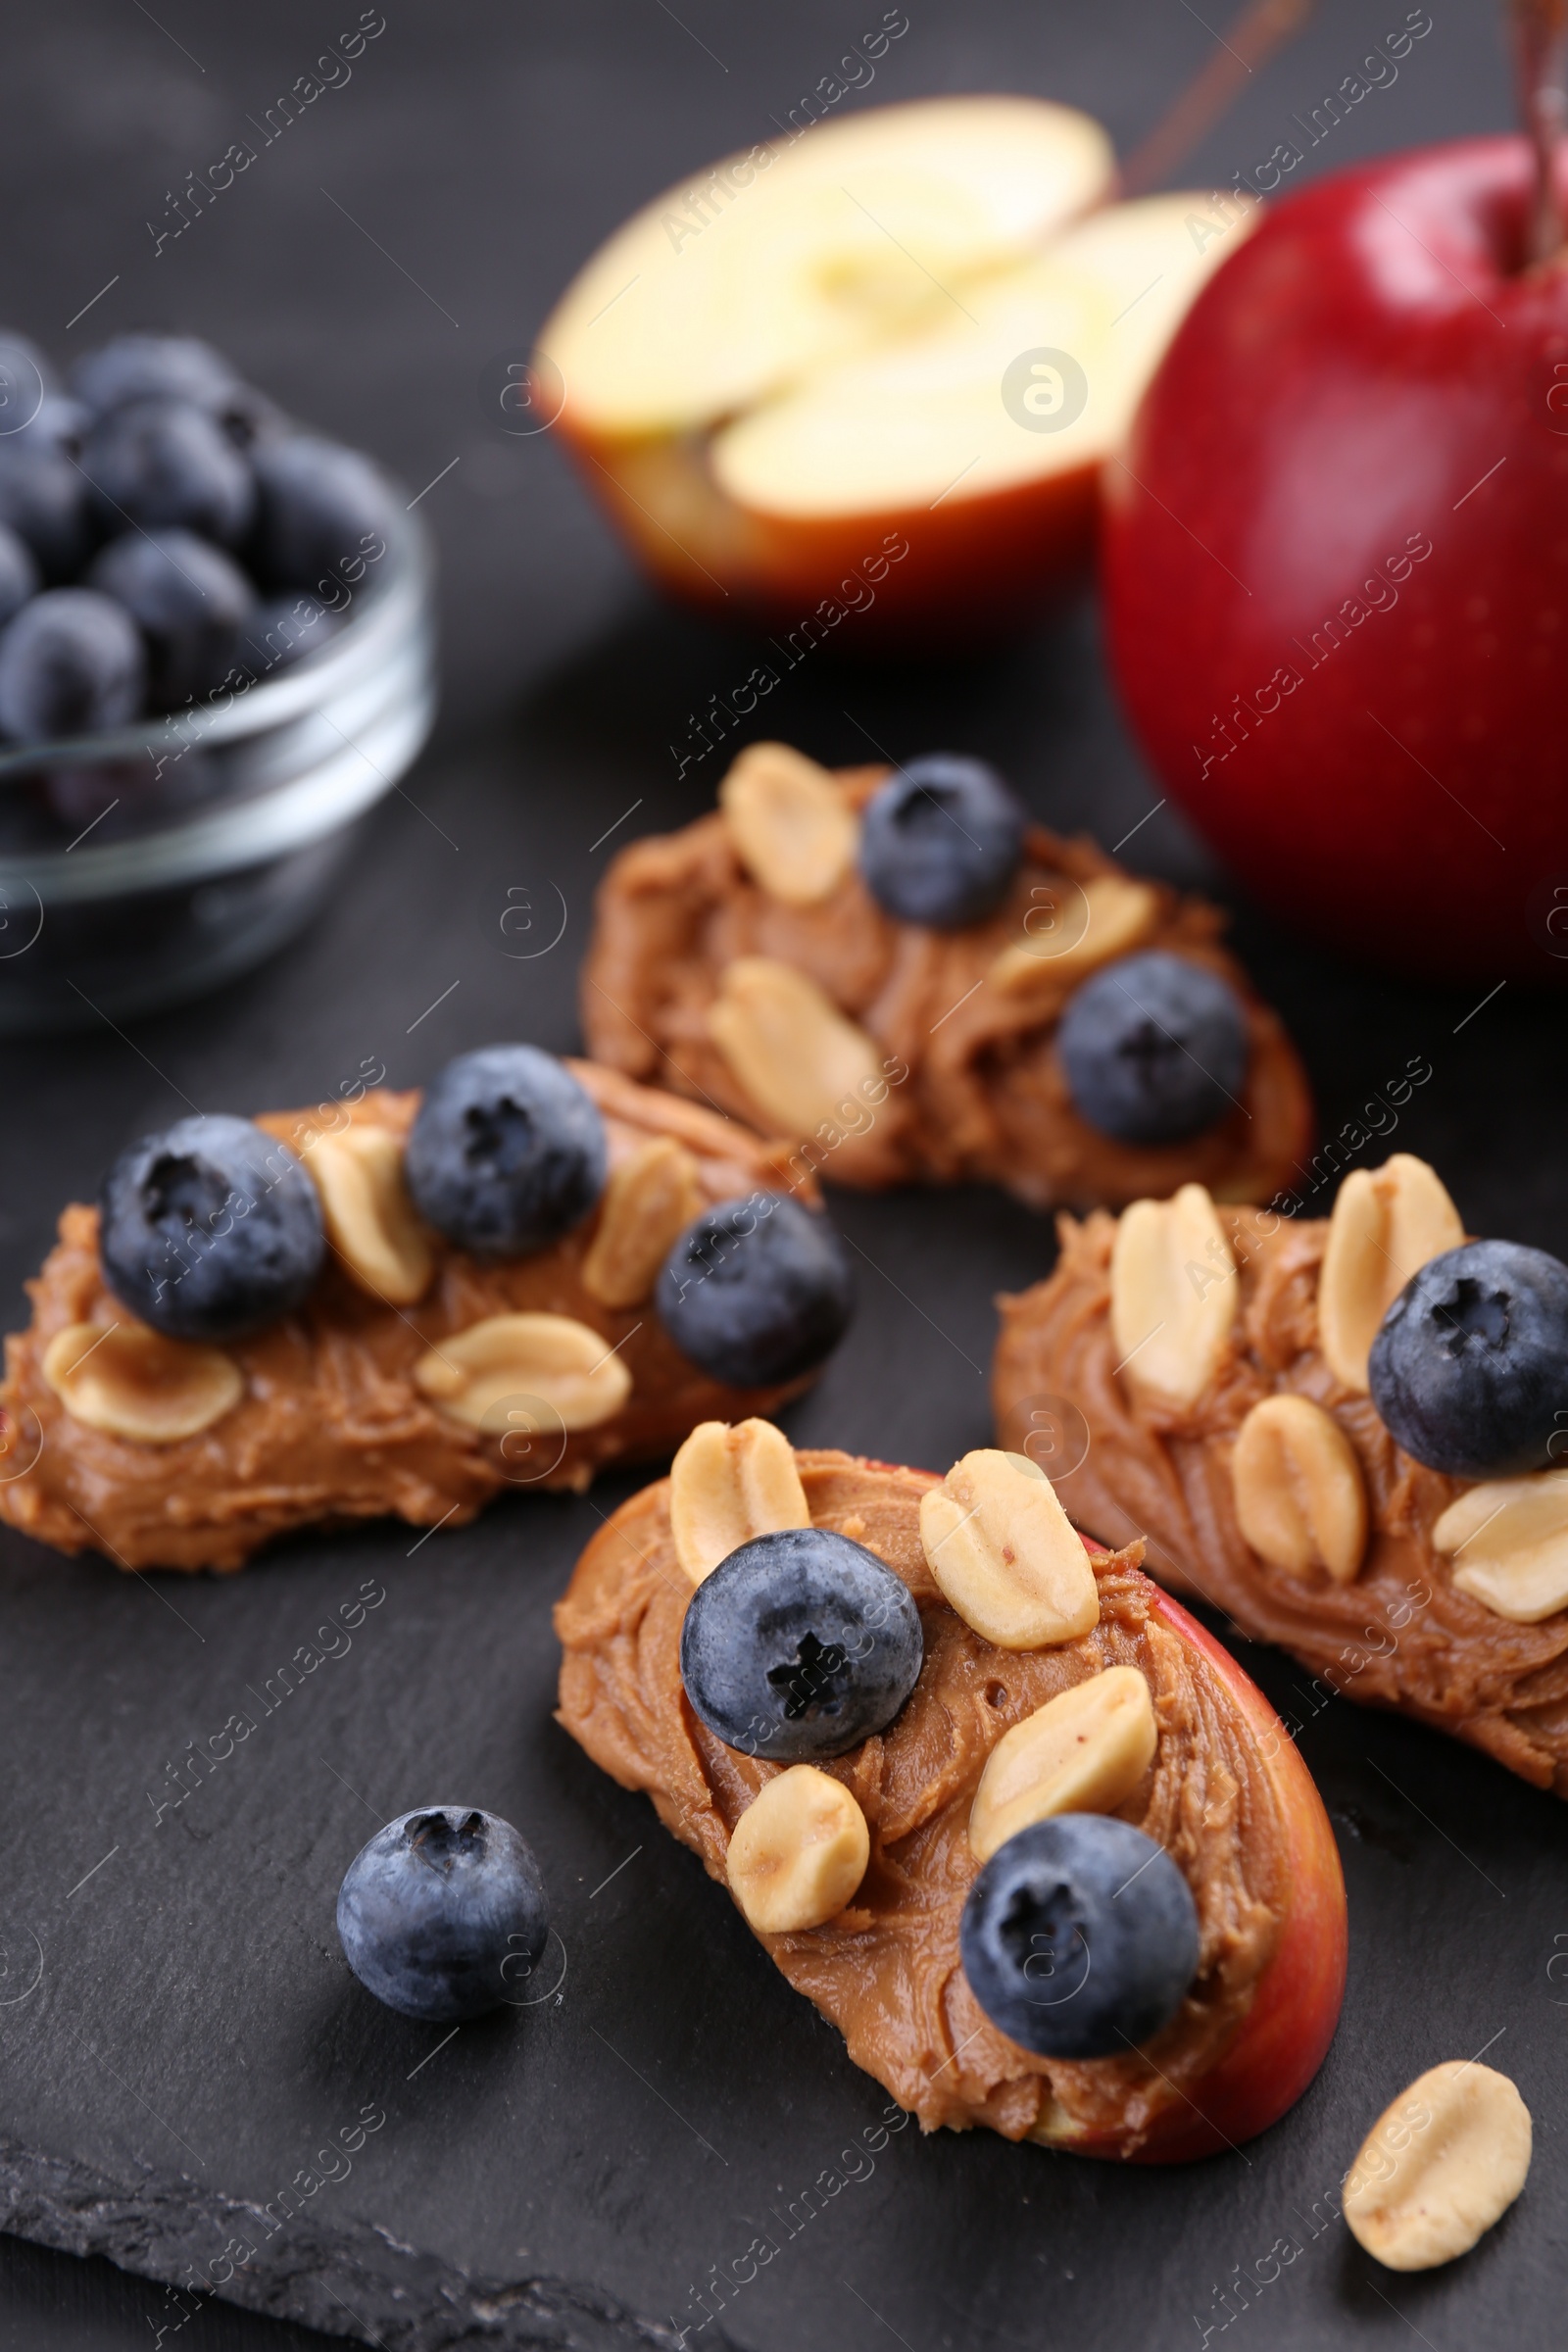 Photo of Fresh apples with peanut butter and blueberries on dark table, closeup